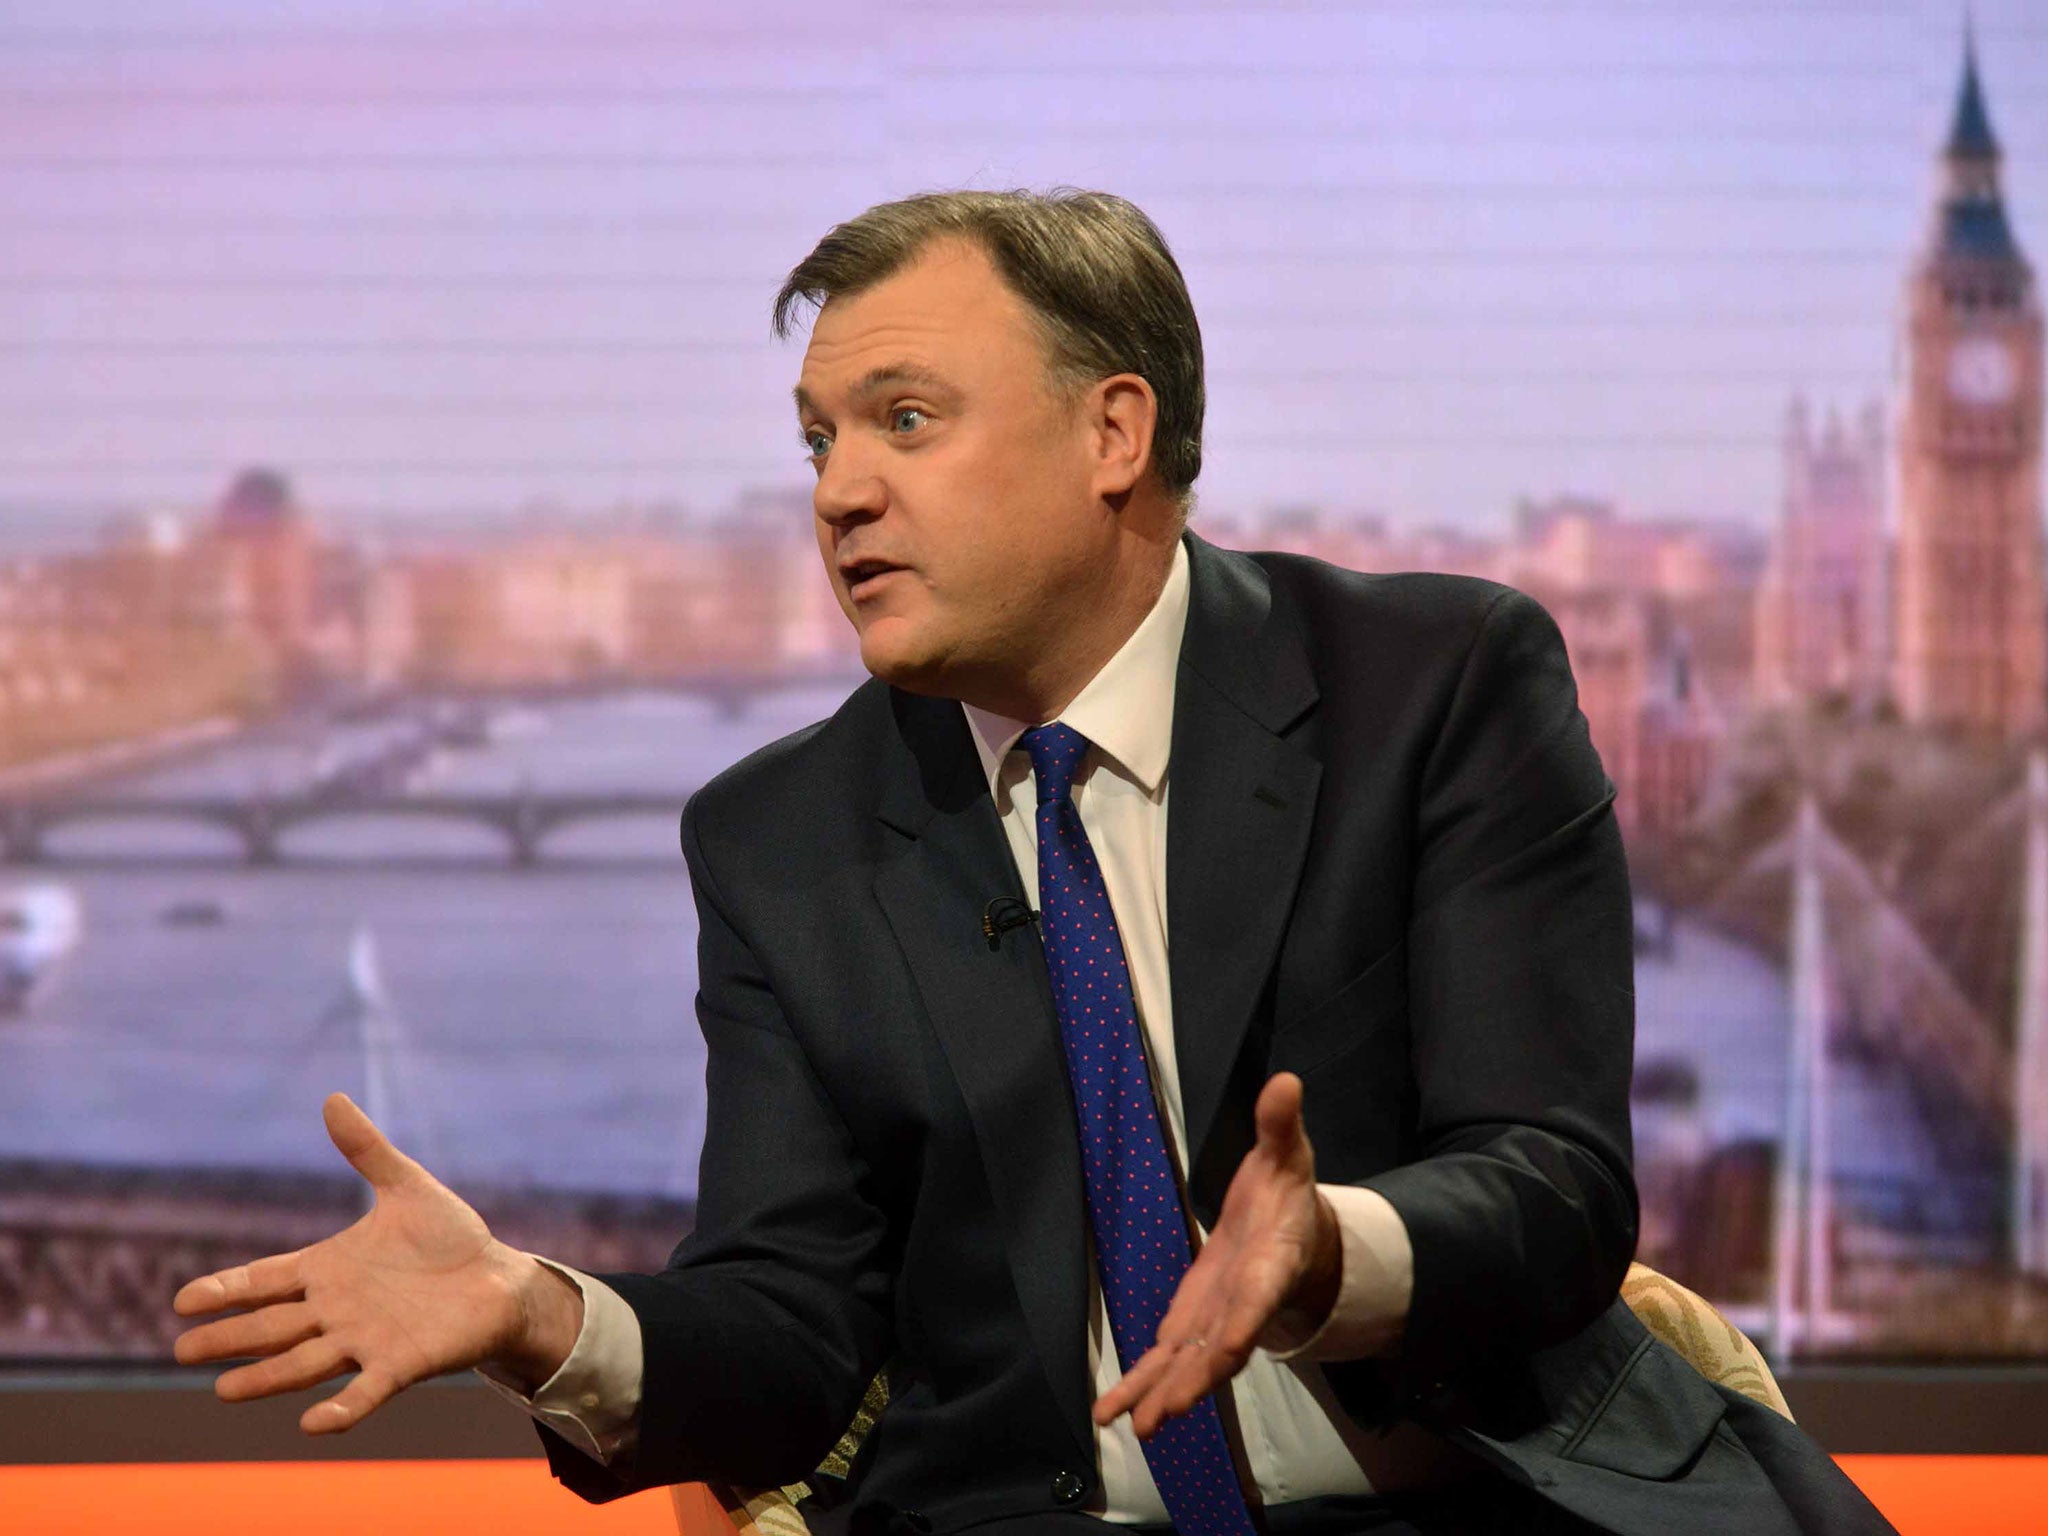 Ed Balls on ‘The Andrew Marr Show'